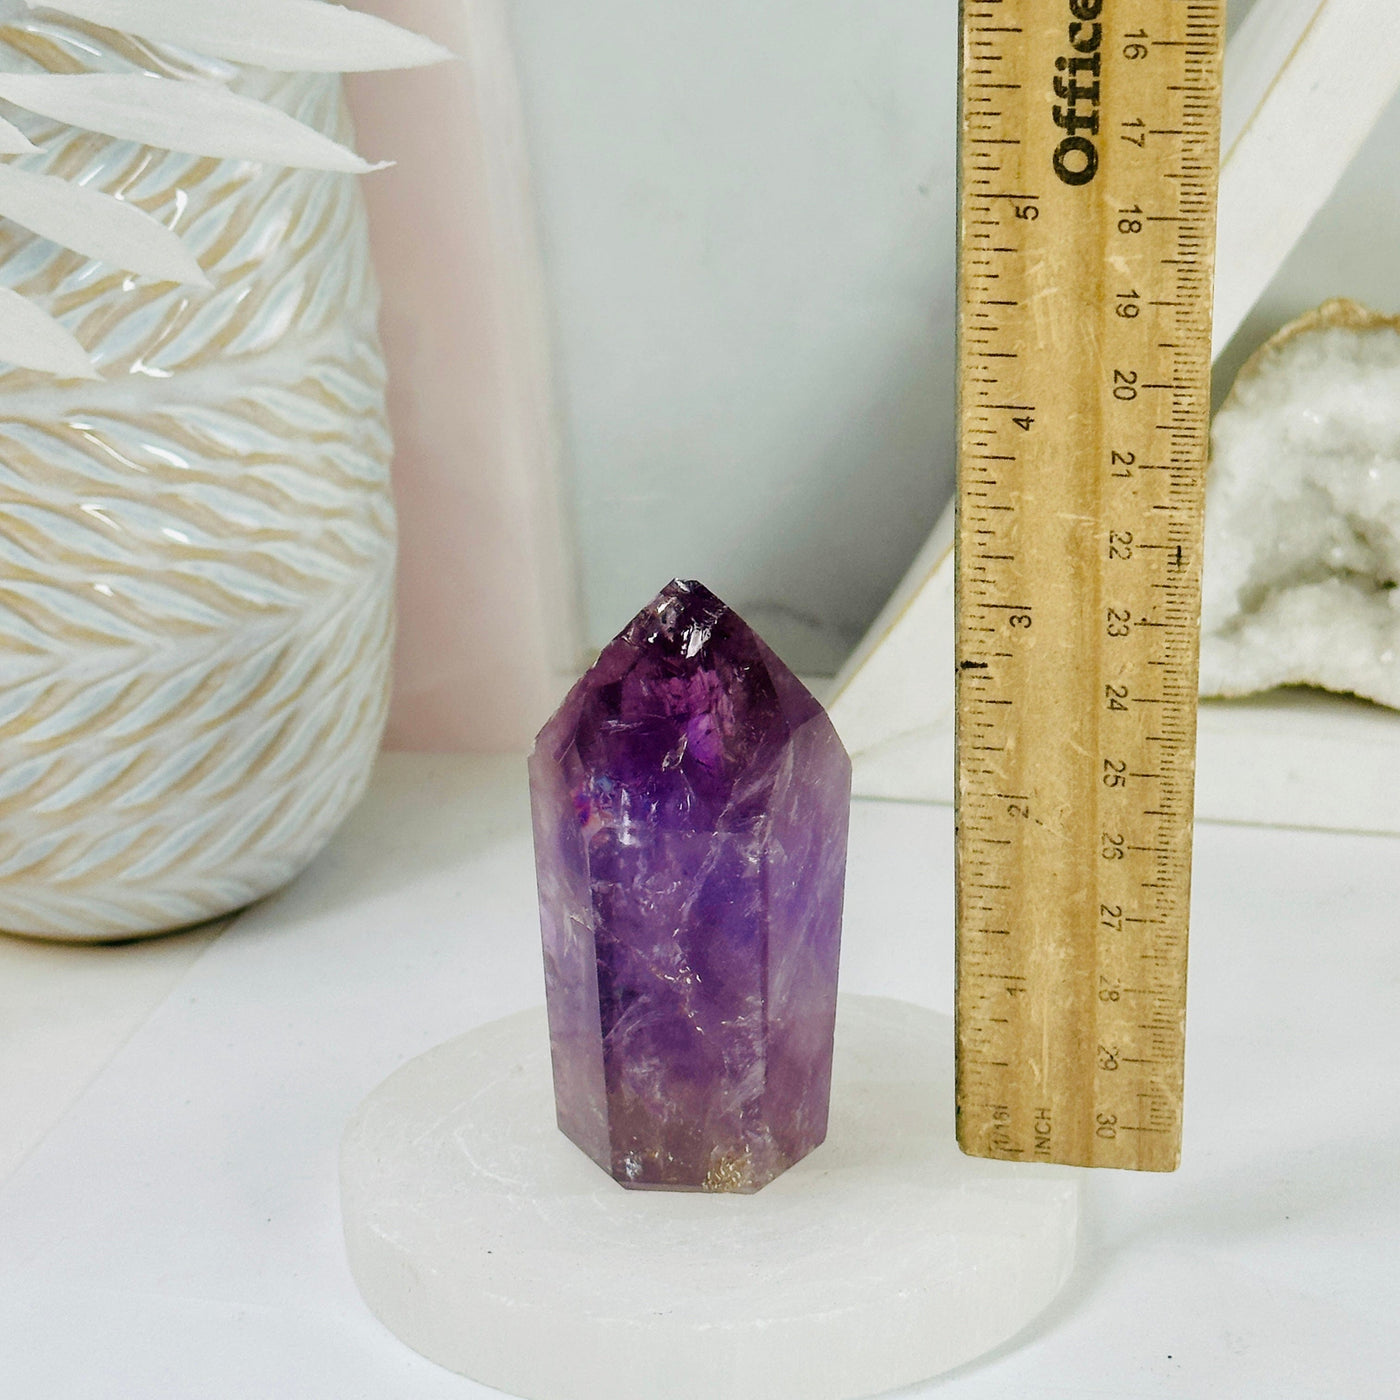 Amethyst Polished Point - Crystal Point - OOAK with ruler for size reference